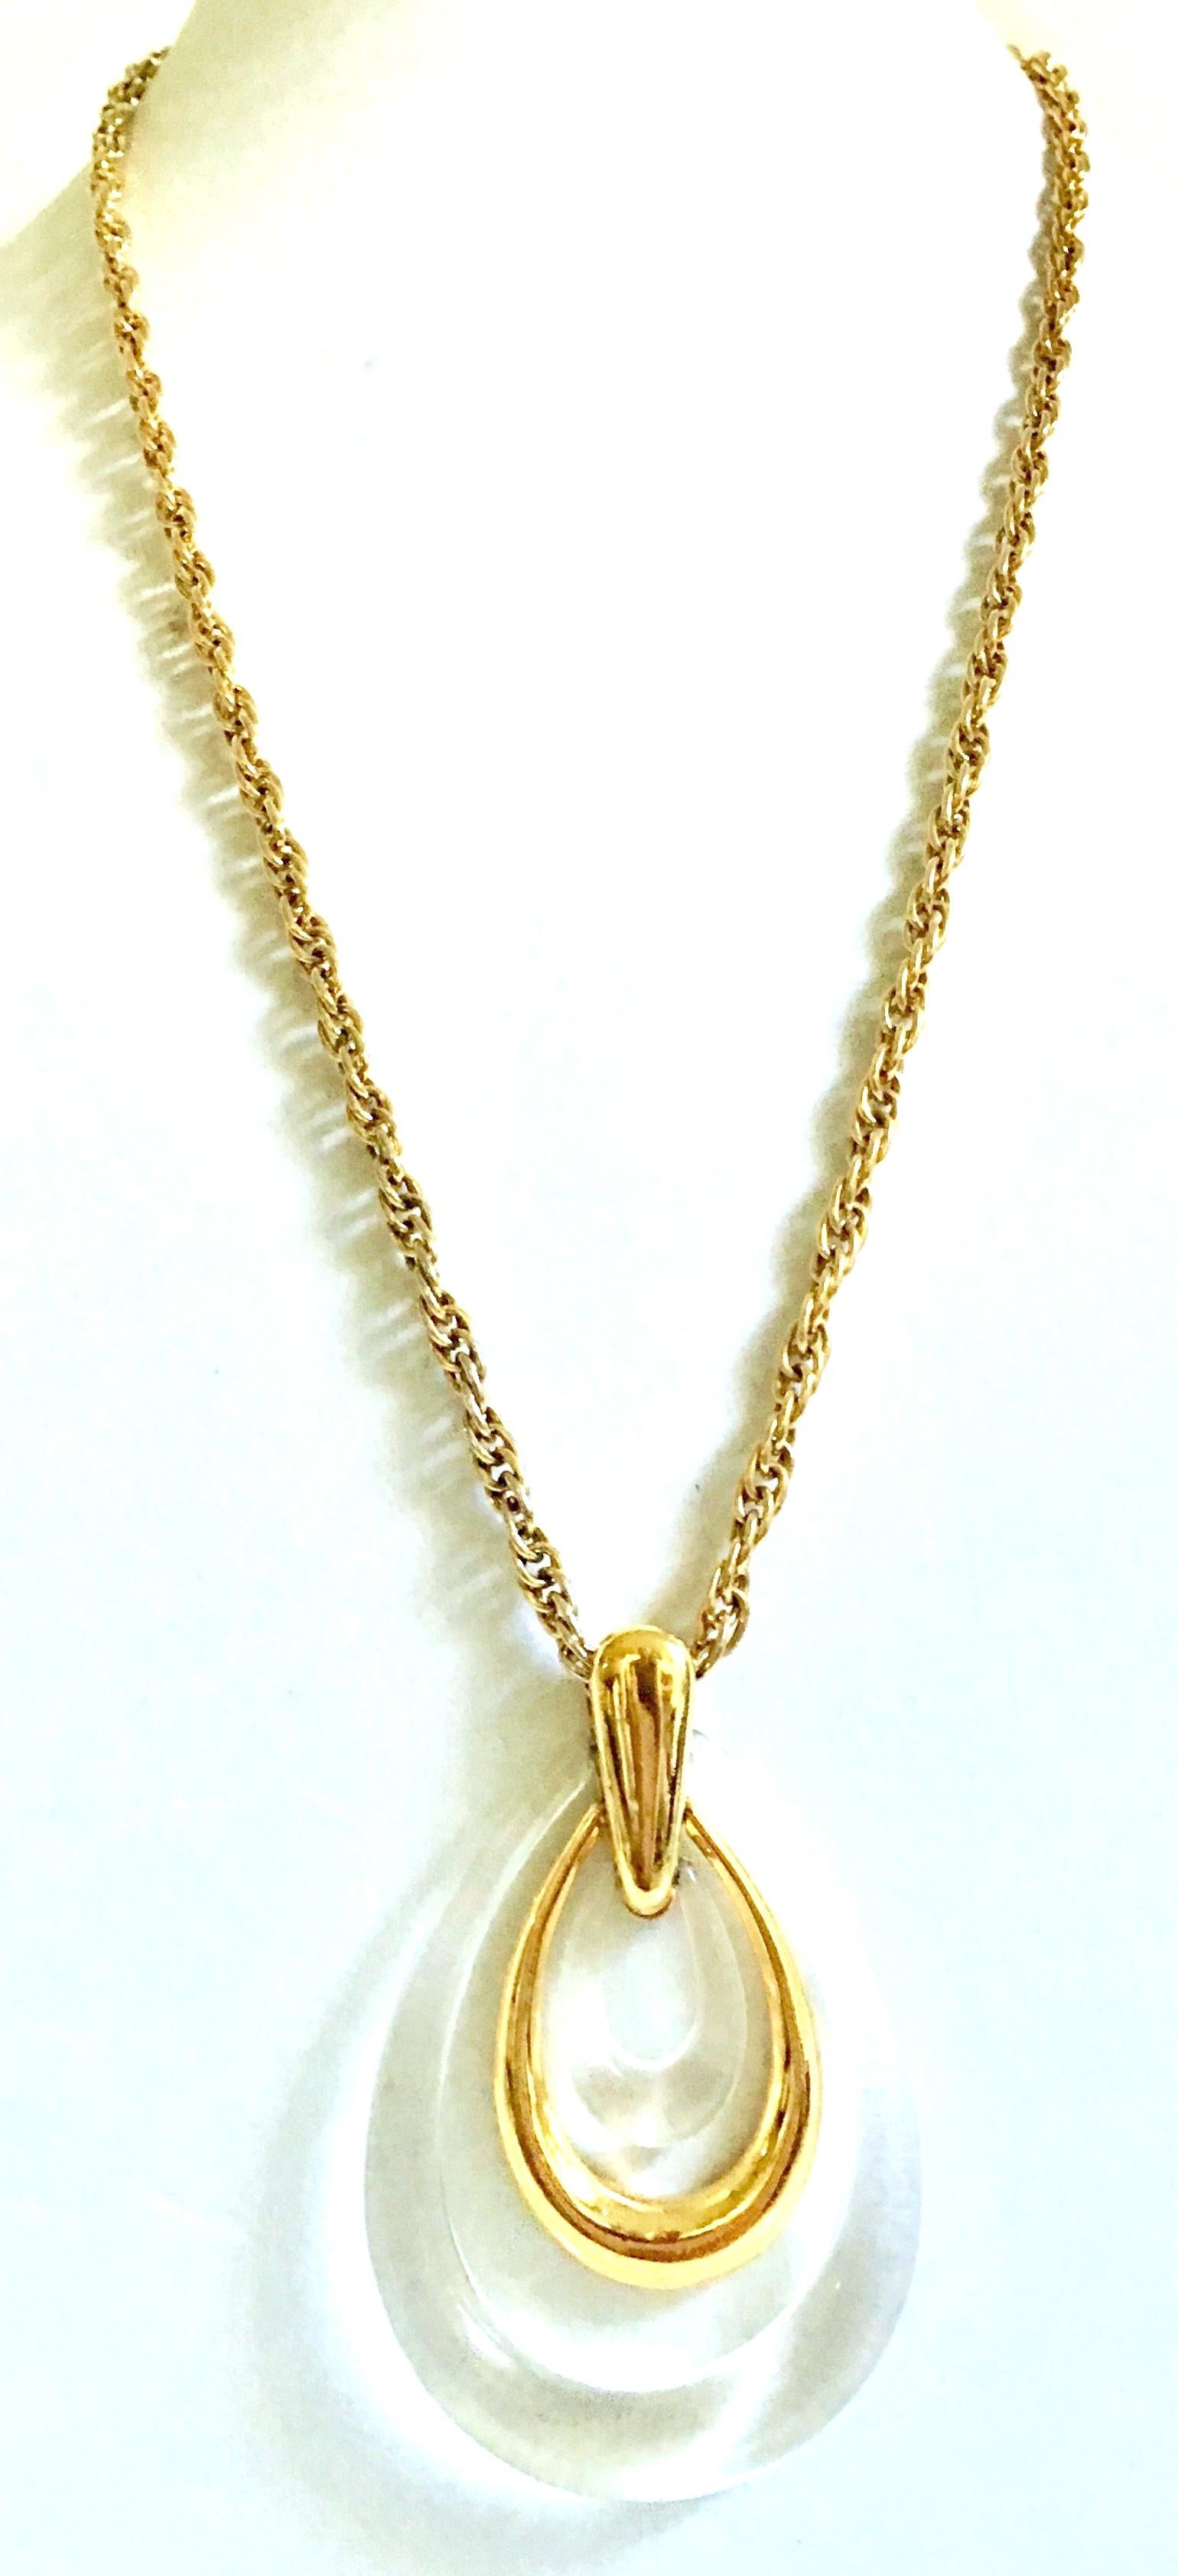 20th Century Gold & Translucent Lucite Articulating Teardrop Pendant Necklace by, Trifari. This Trifari signed piece features a gold plate chain with a 3.13